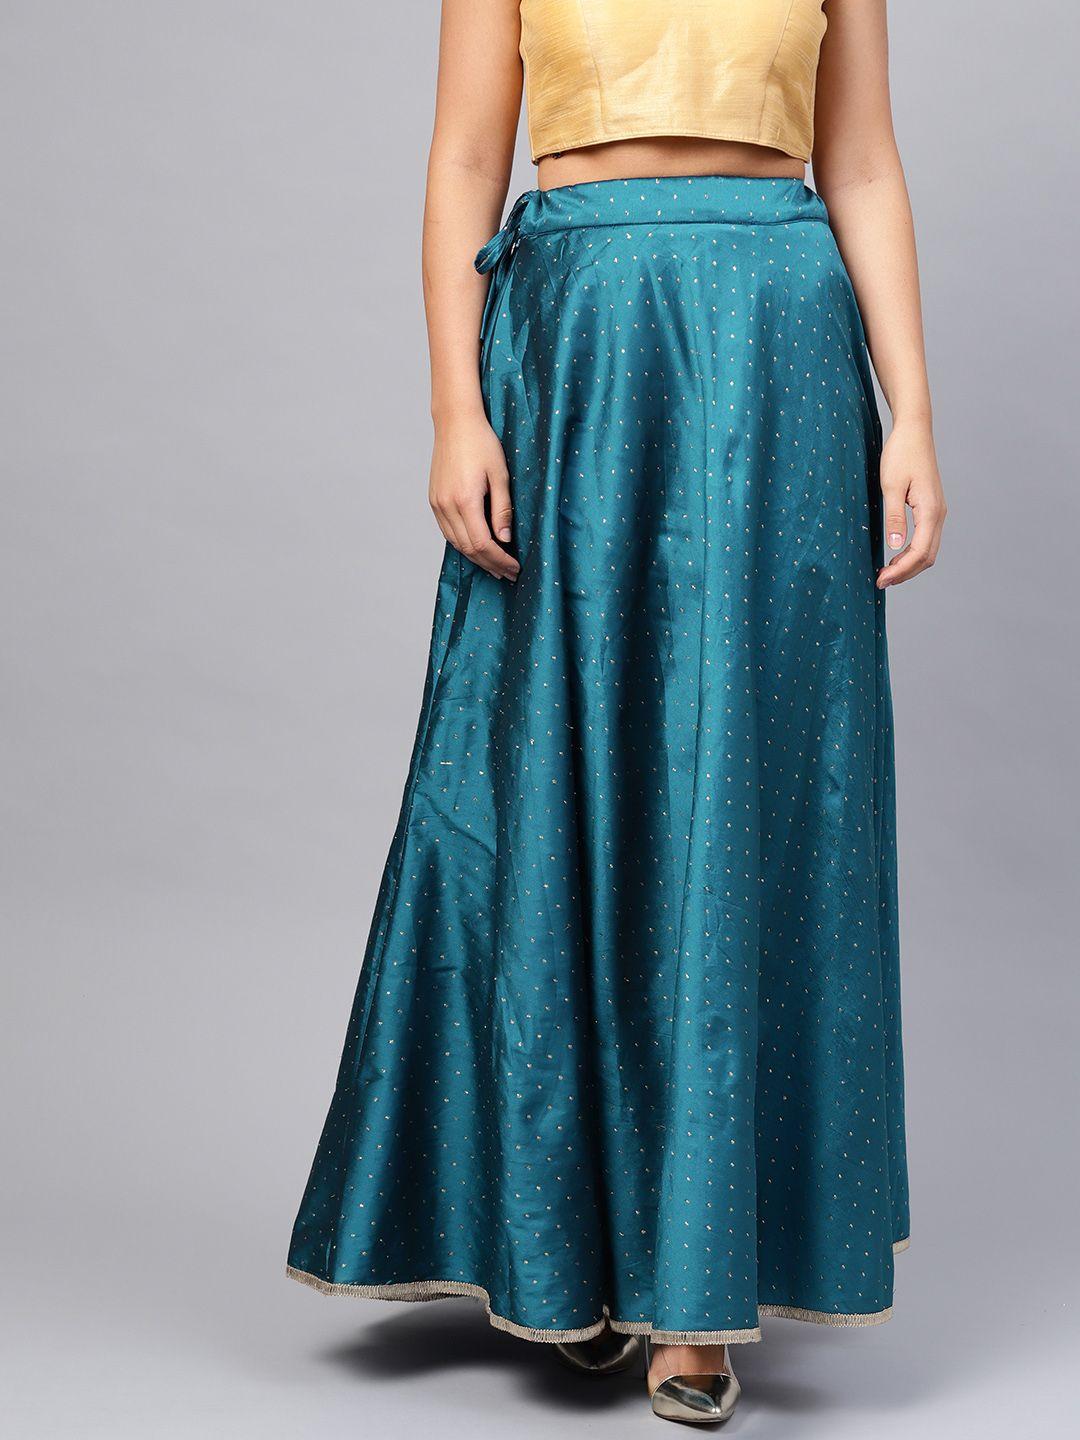 inddus-women-teal-blue-&-golden-embroidered-maxi-flared-skirt